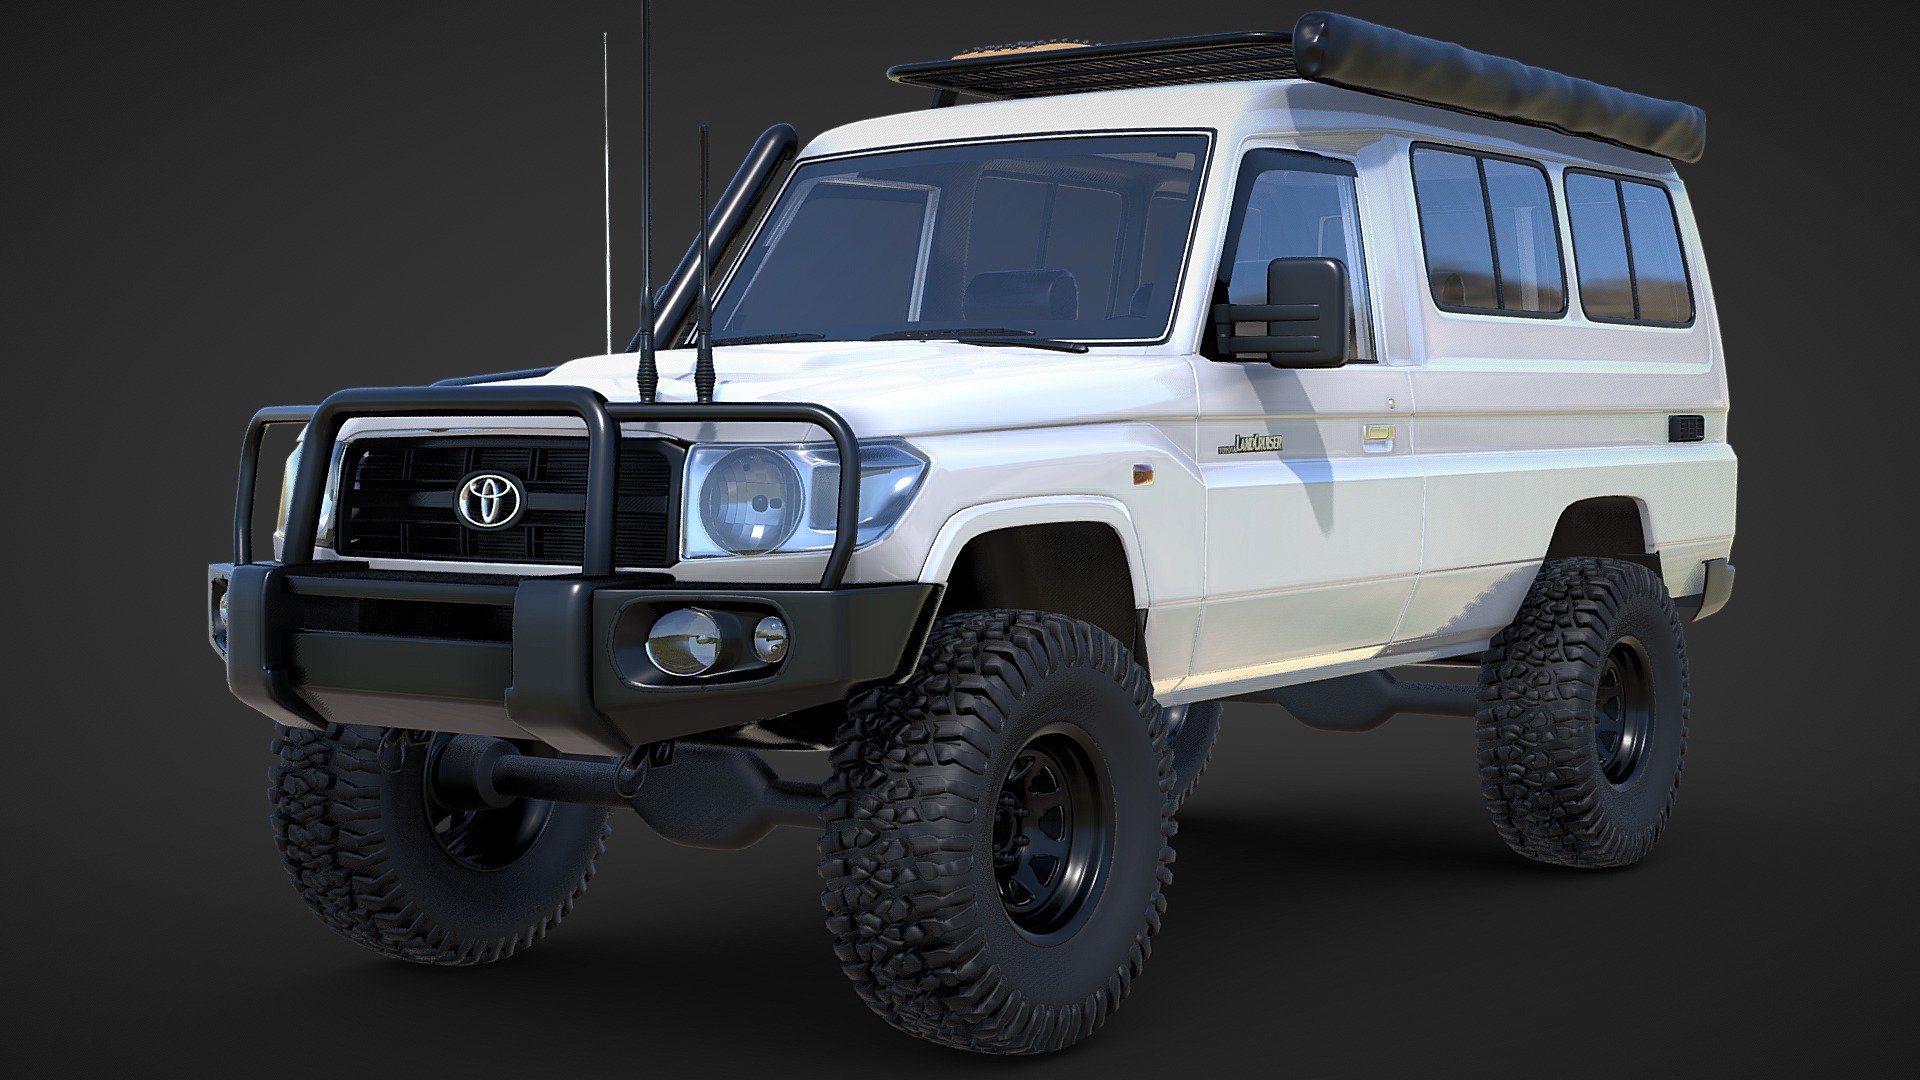 Toyota Landcruiser 78 Series Touring Variation - Toyota Landcruiser 78 Series Touring - Buy Royalty Free 3D model by 4x4 Mania (@4x4Mania) 3d model